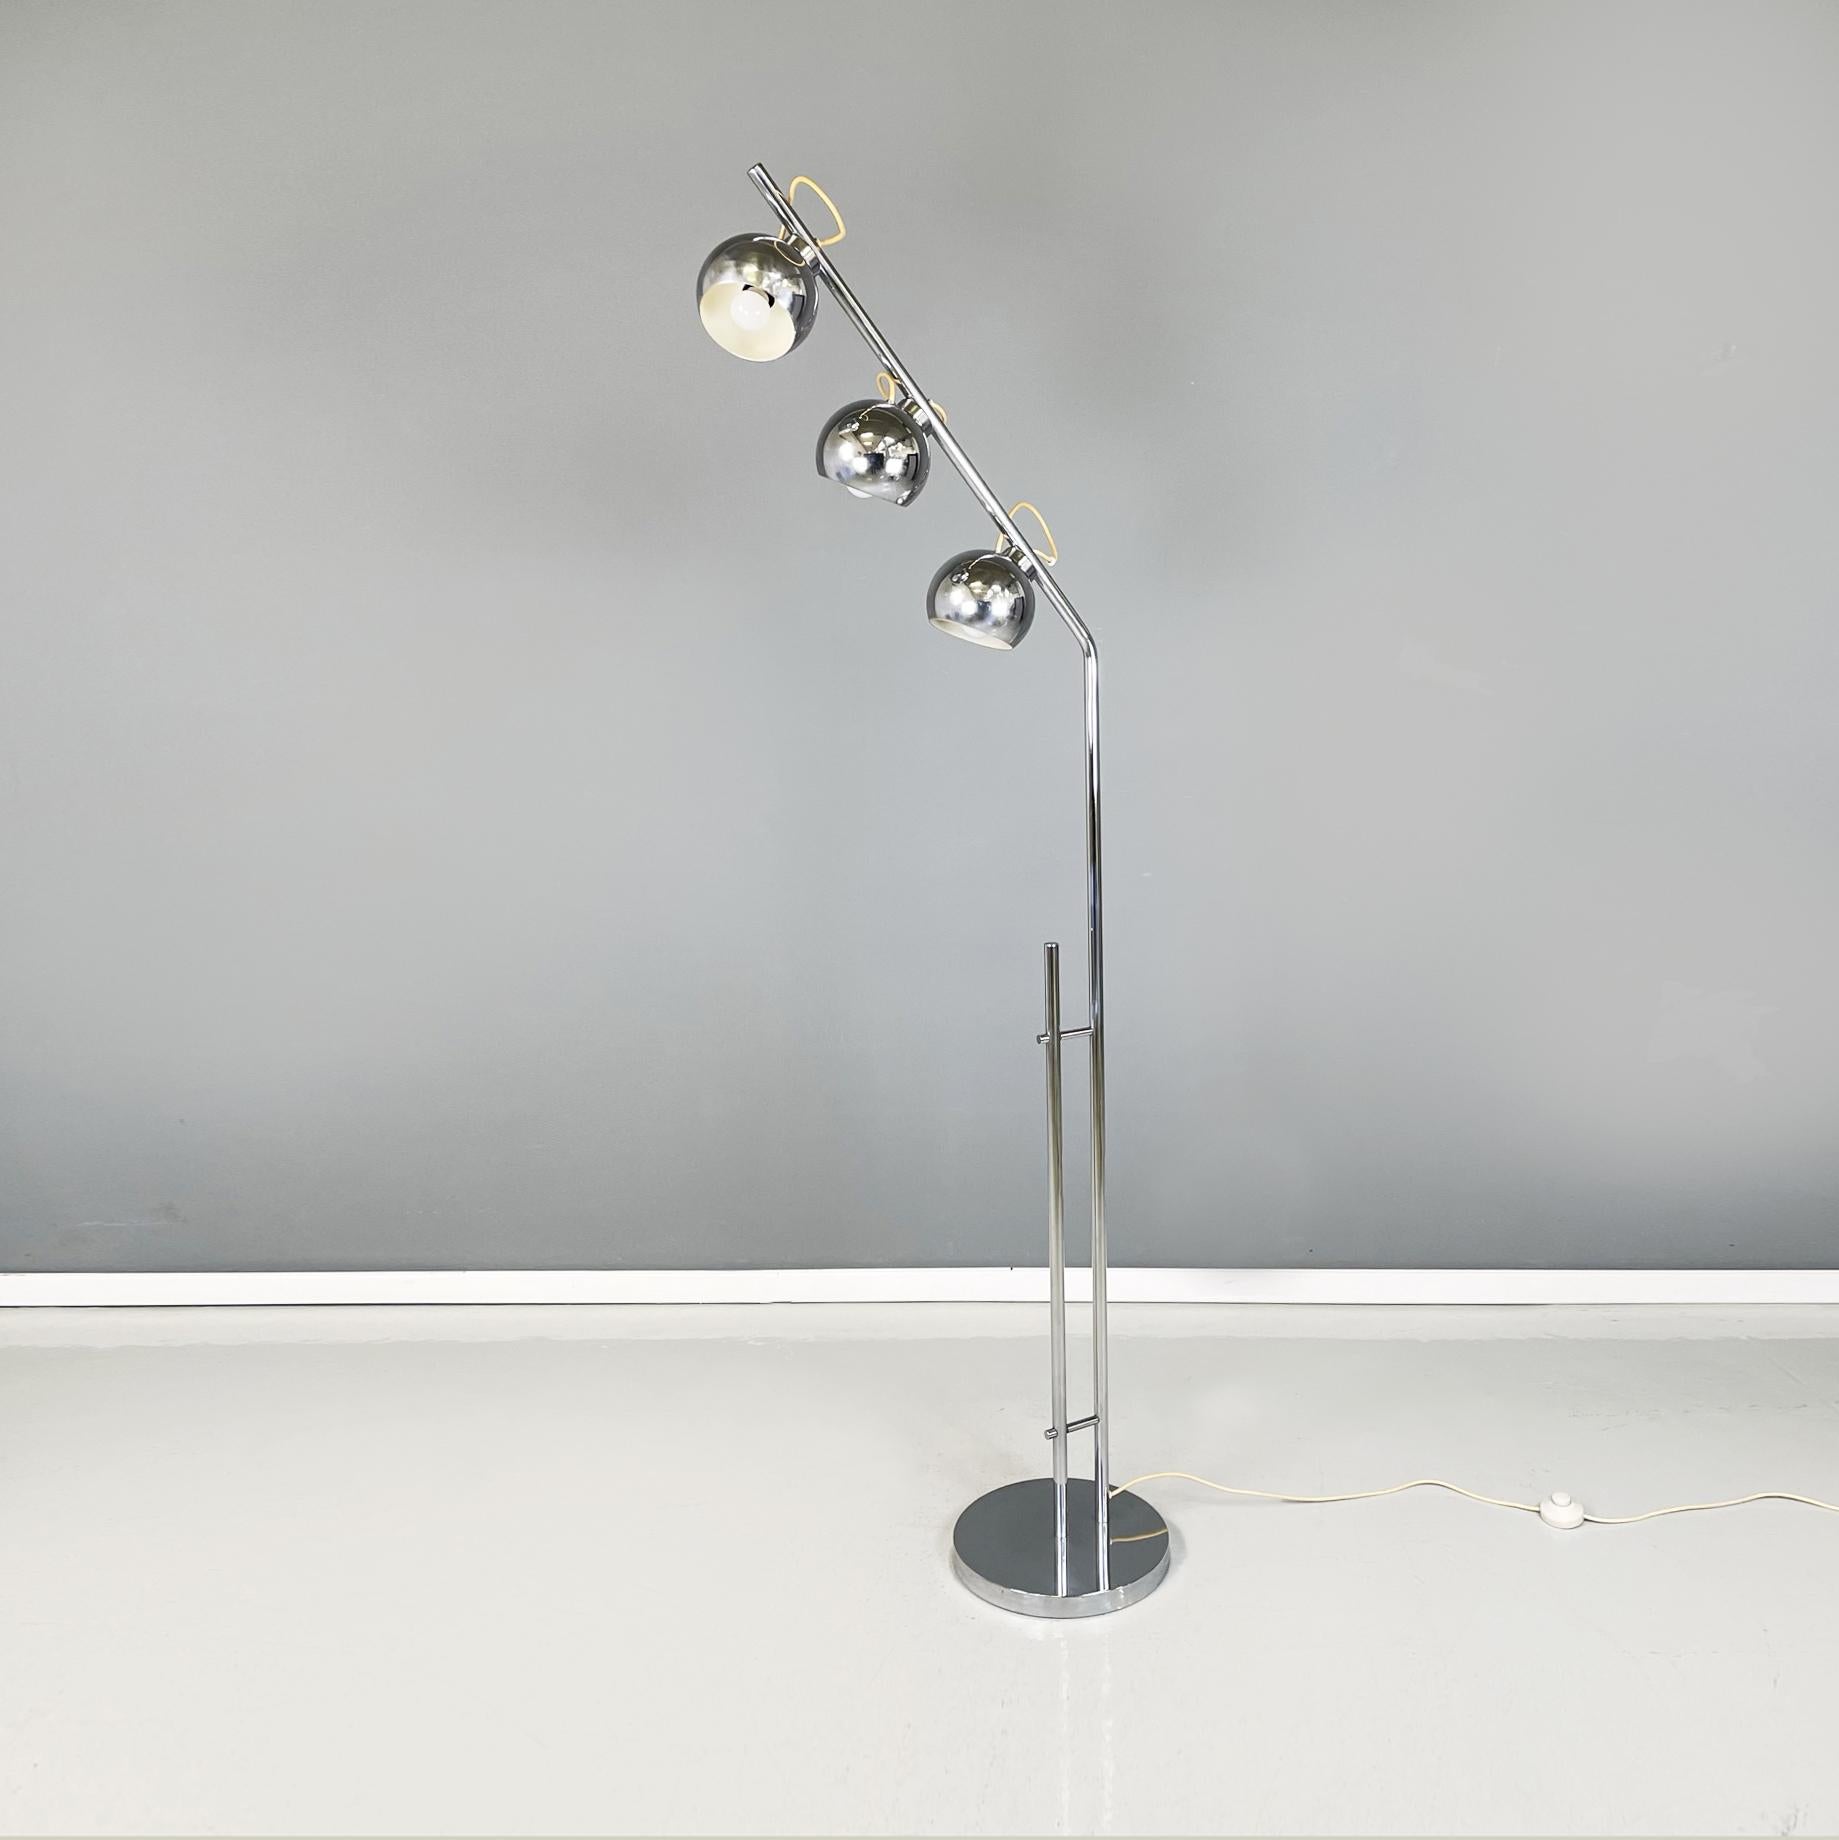 Italian Space age adjustable floor lamp in chromed steel by Reggiani, 1960-1970s
Floor lamp with 3 adjustable lights entirely in chromed steel. The speakers are joined to the structure through a magnet, which allows them to be positioned as you